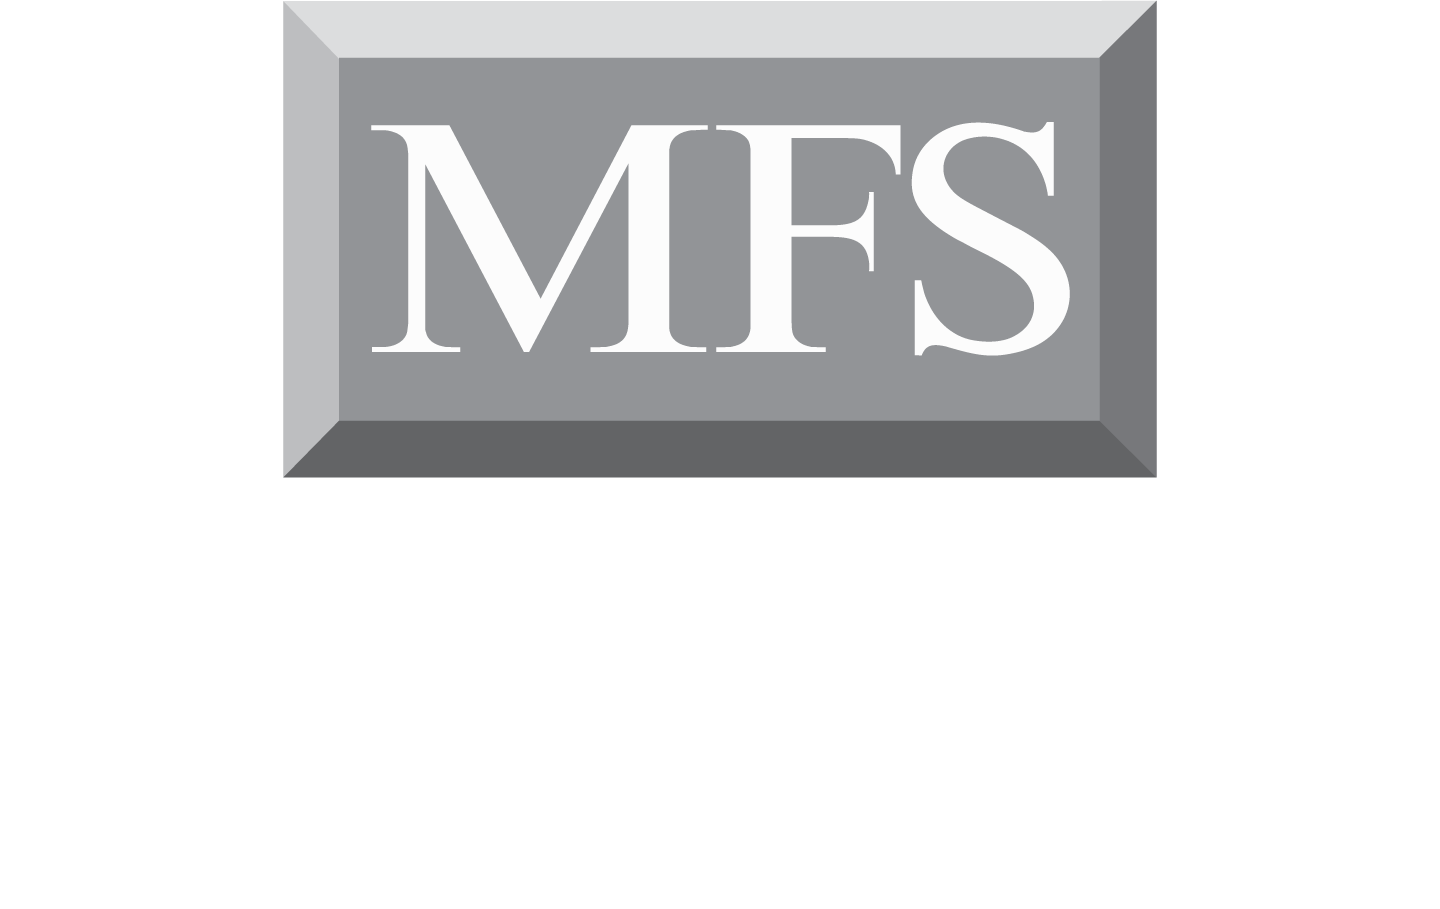 Midwest Finishing Systems